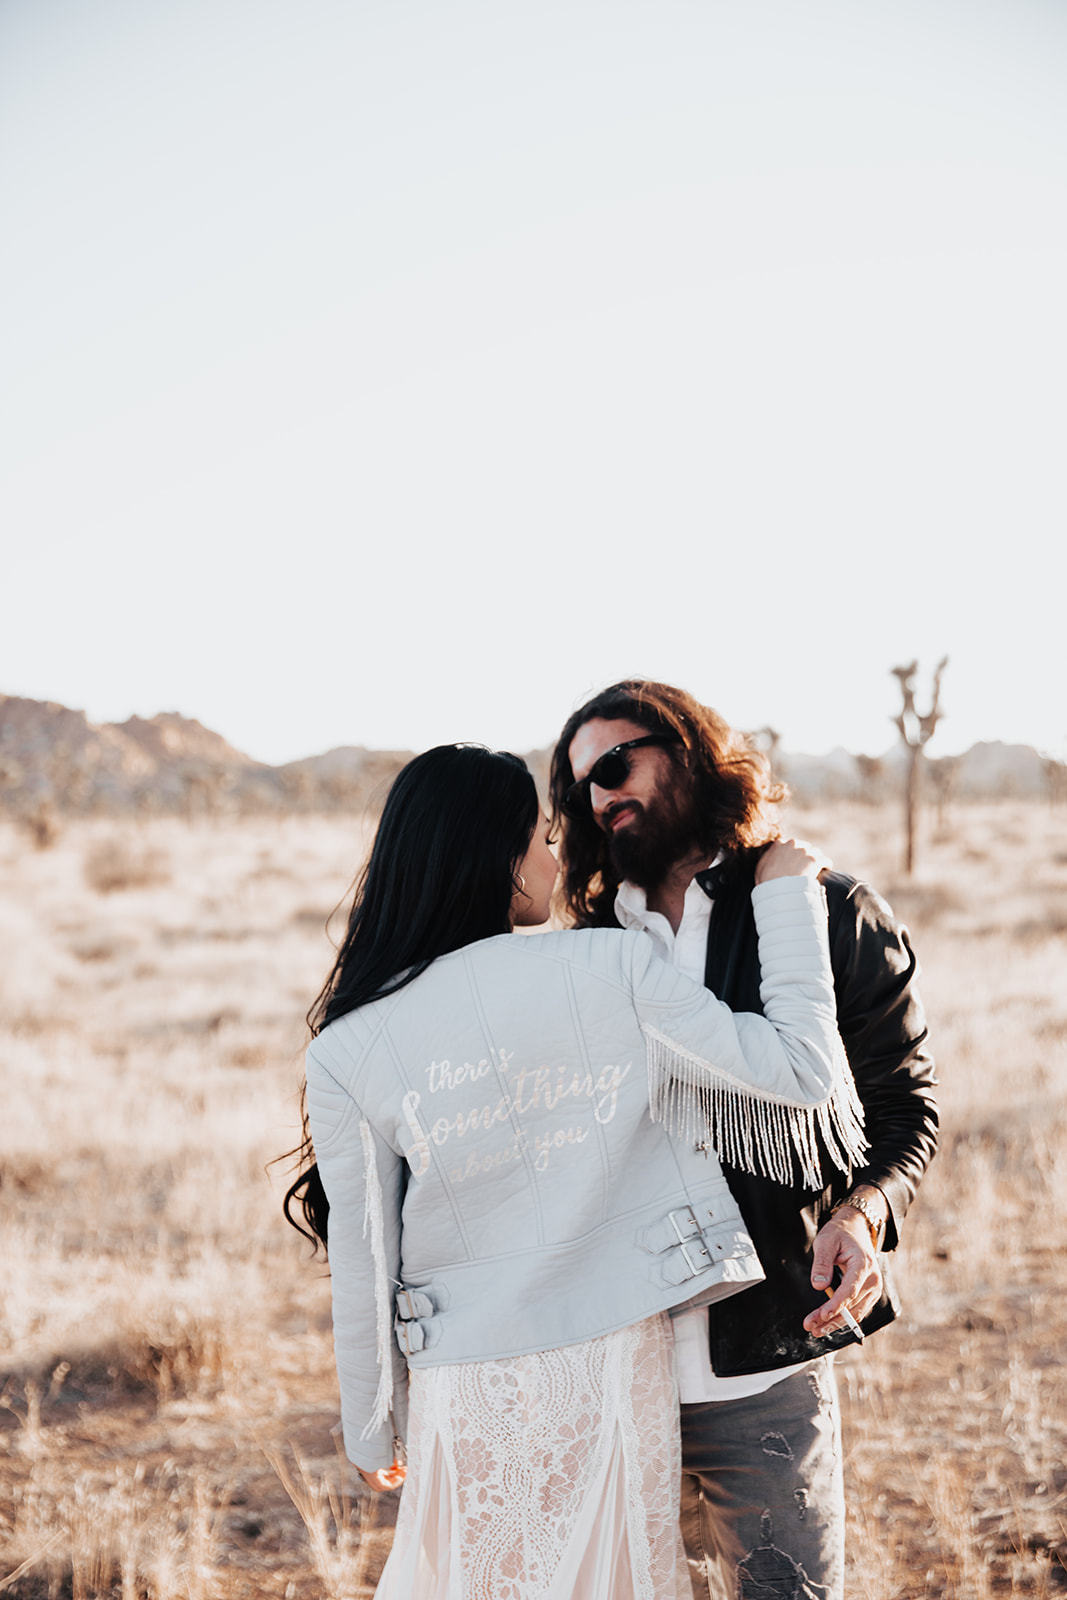 Long haired man with sunglasses and woman in white dress and light blue jacket standing in Joshua Tree for engagement